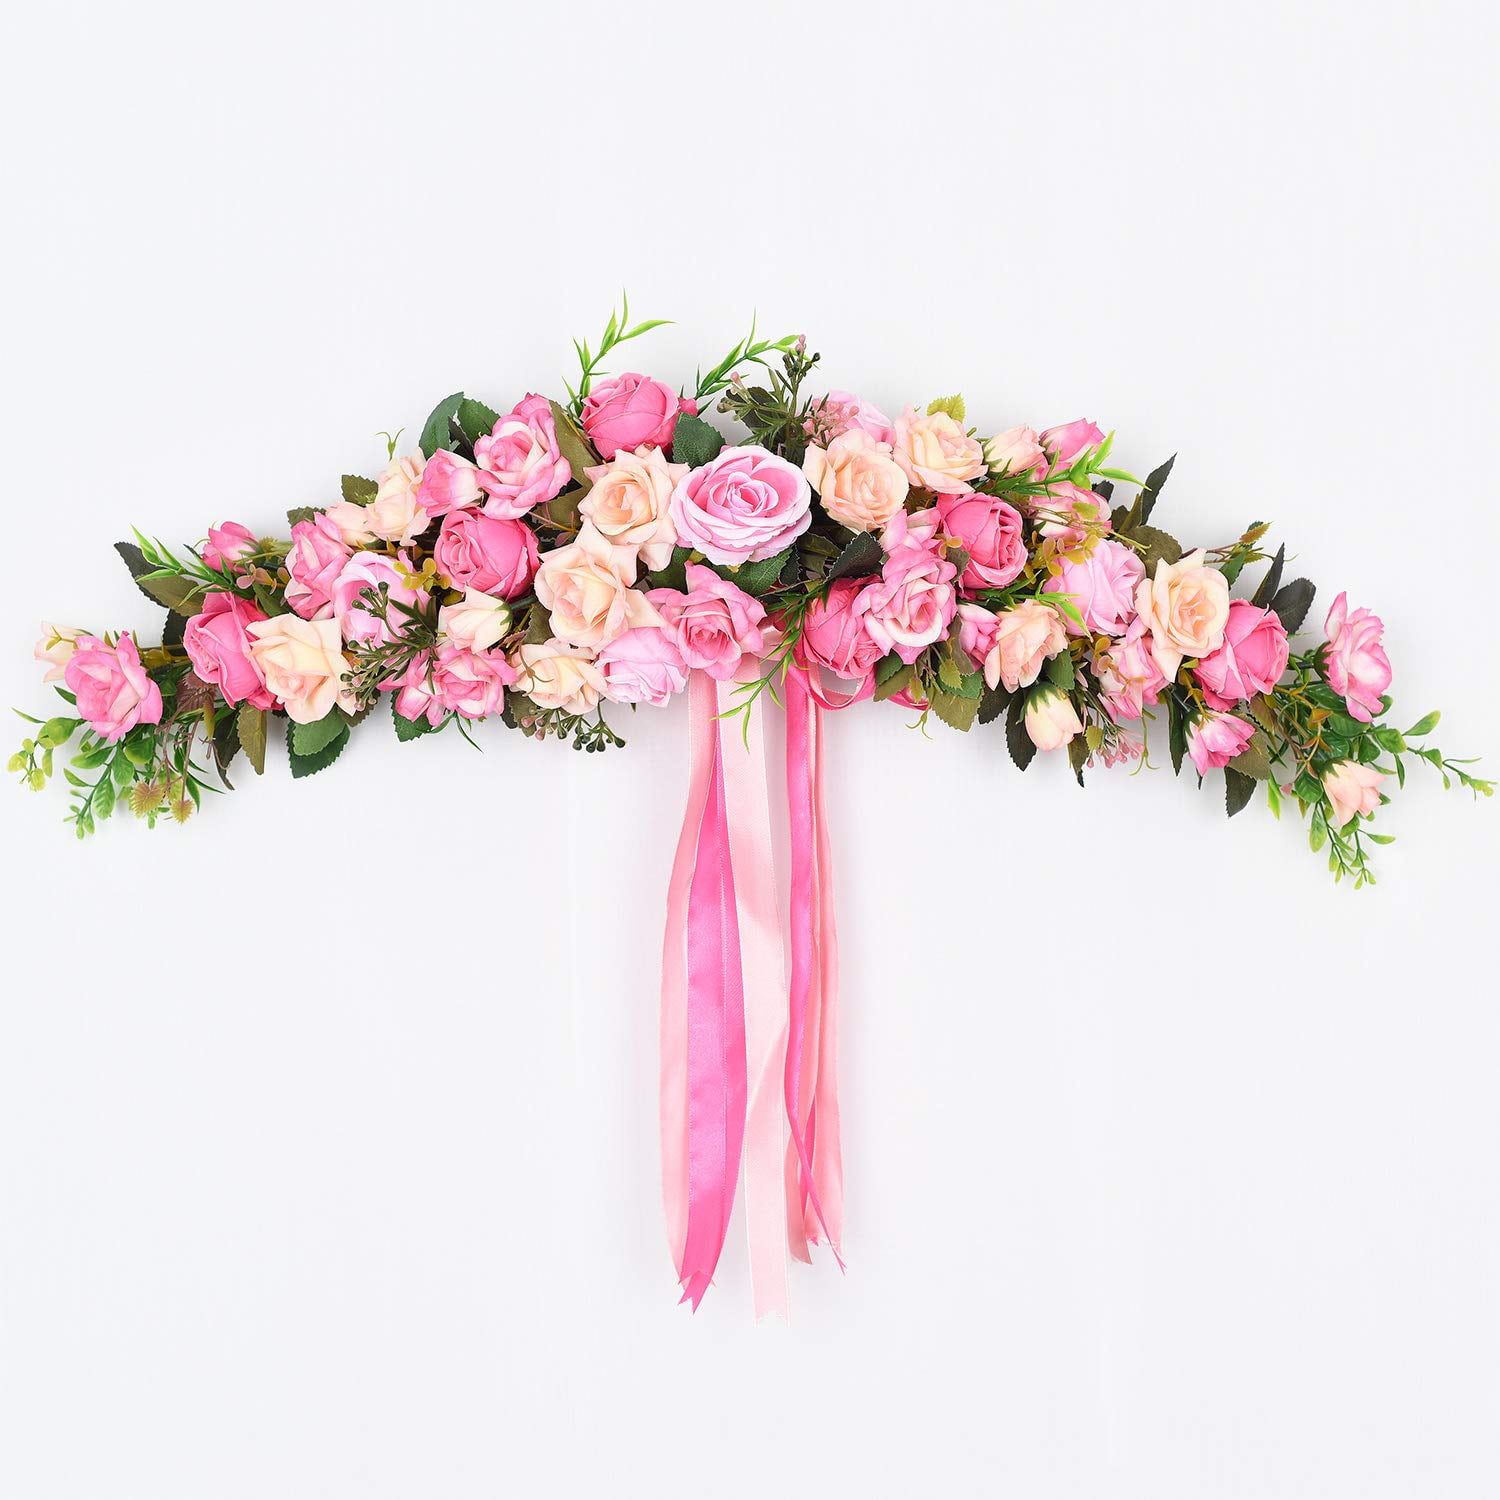 Artificial Peony Flower Swag,Artificial Rose Flower Swag,Swag with Silk Ribbon for Wedding Arch Front Door Wall Decor